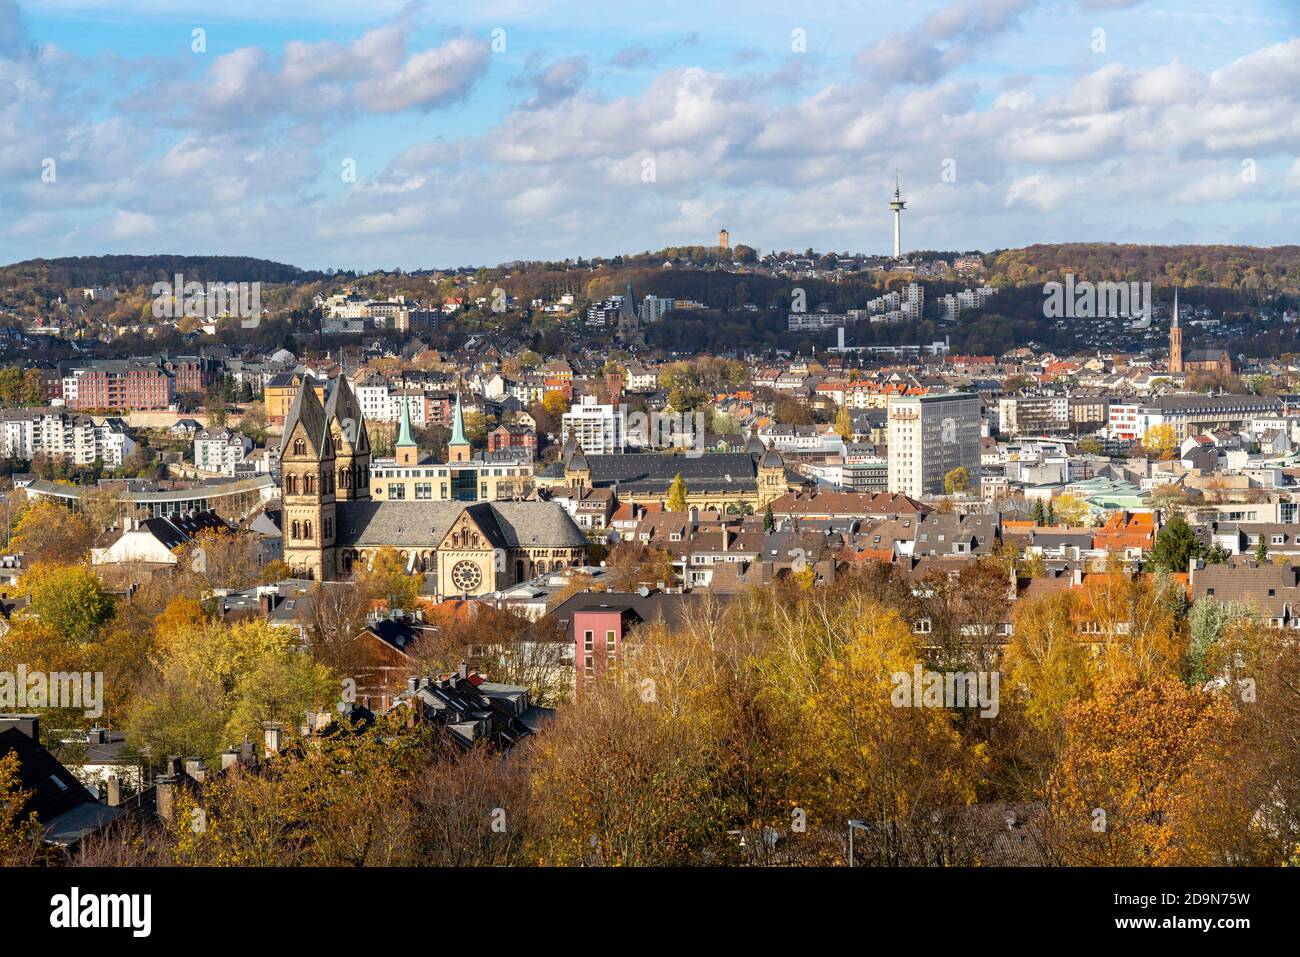 View over Wuppertal, to the north, city centre district Elberfeld, church St. Suitbertus, basilica St. Laurentius, historic city hall, view over the n Stock Photo